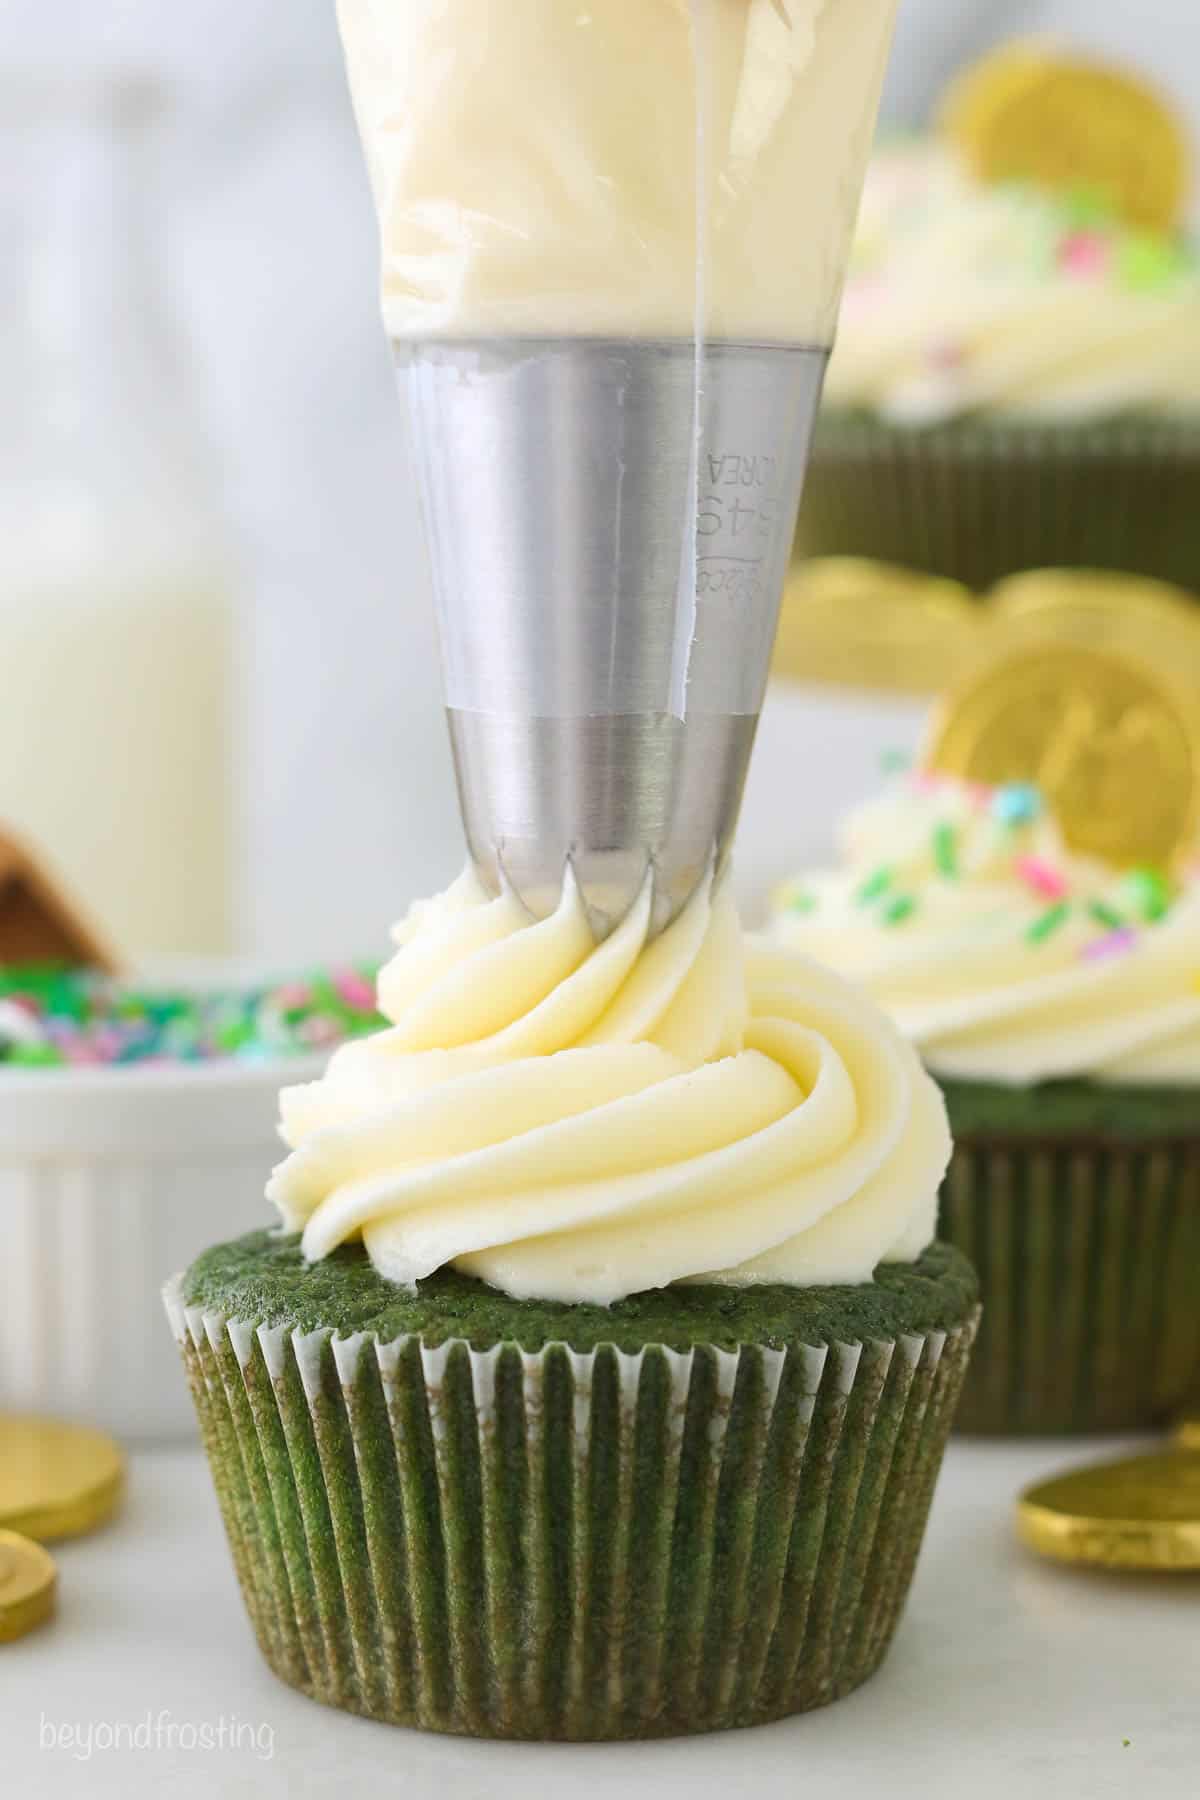 A piping bag frosting a green cupcake with cream cheese frosting